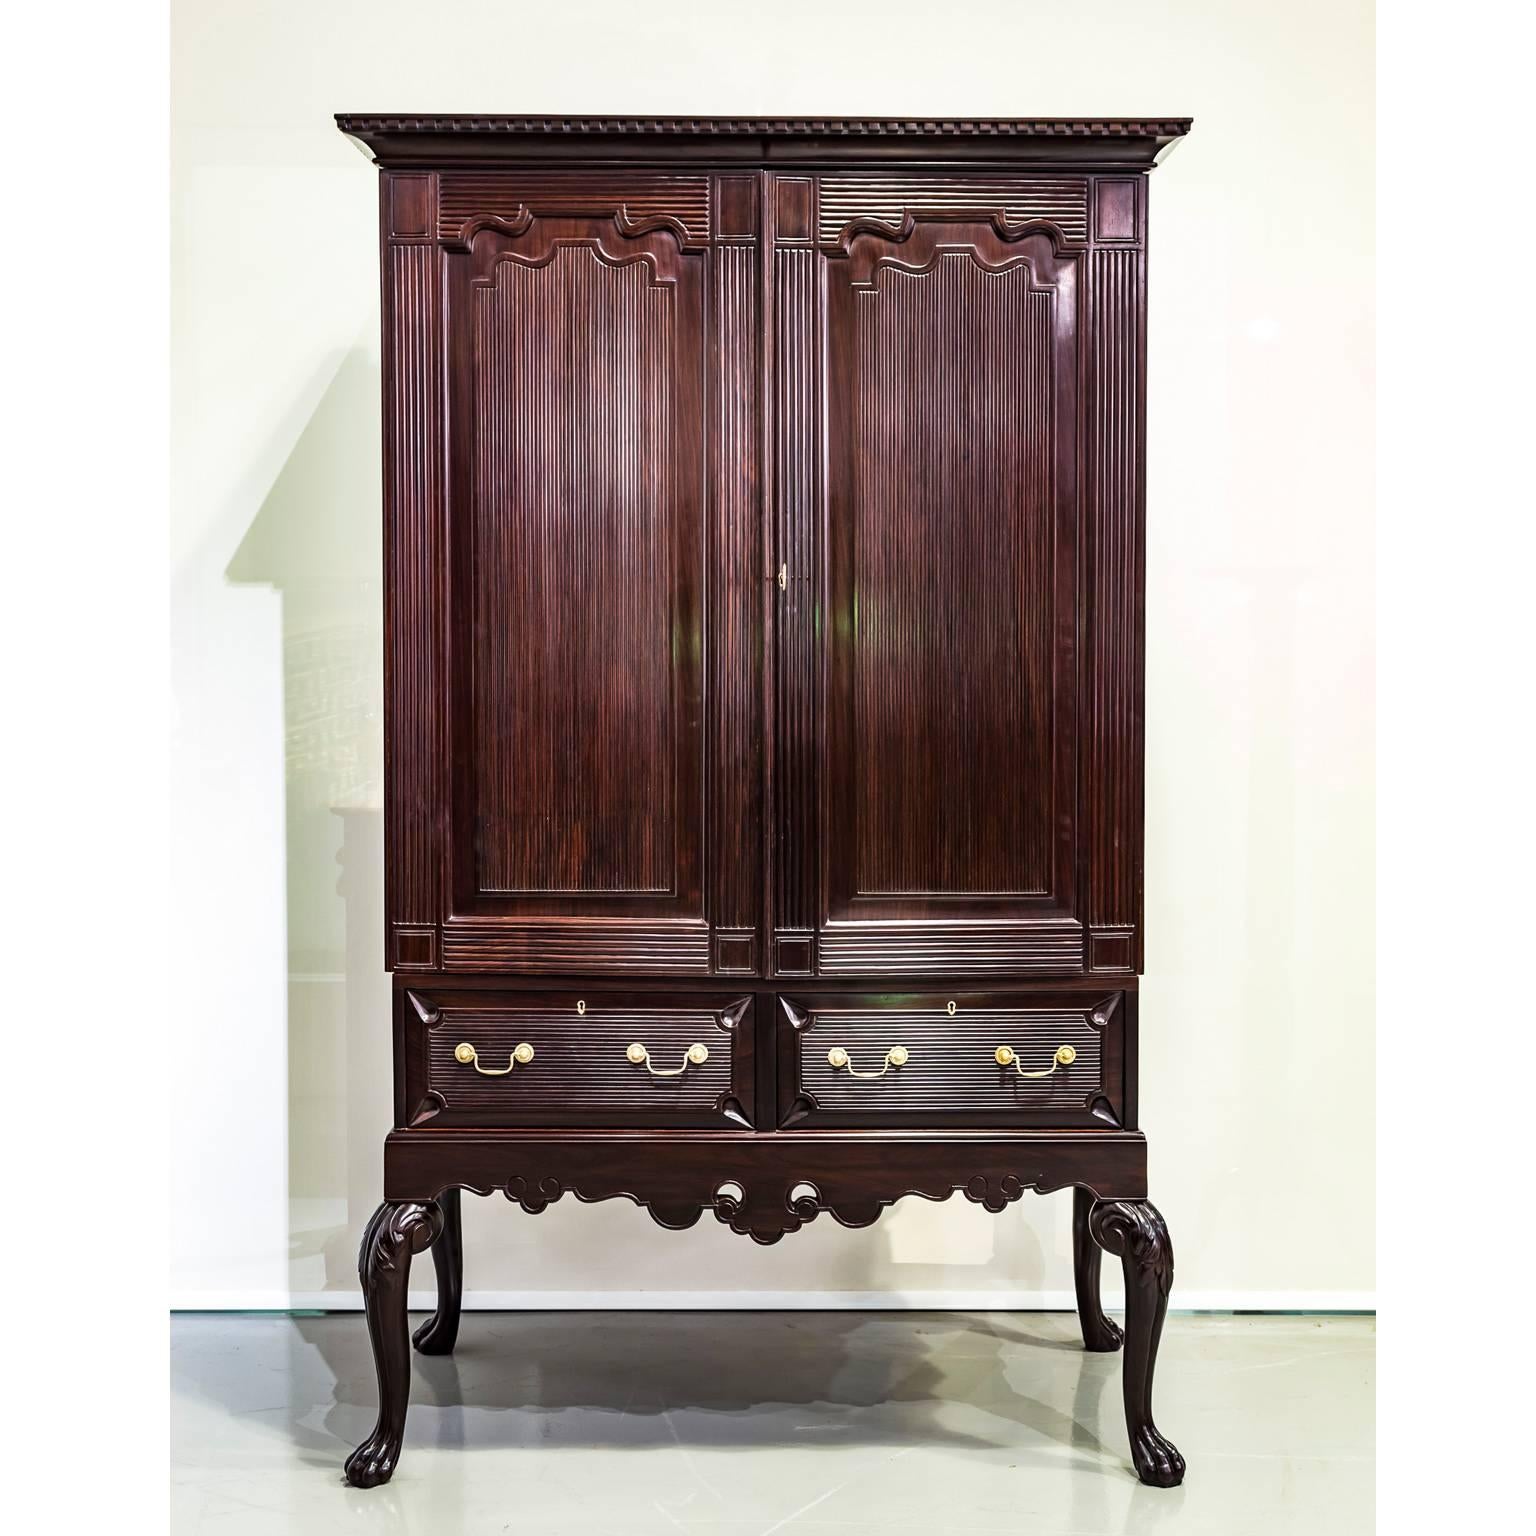 An elegant Portuguese colonial rosewood cupboard on stand with an overhanging rectangular top. The double doors are crafted with an arched cushion moulded panel and with a pattern exclusive to Portuguese India. The doors open to an interior with two